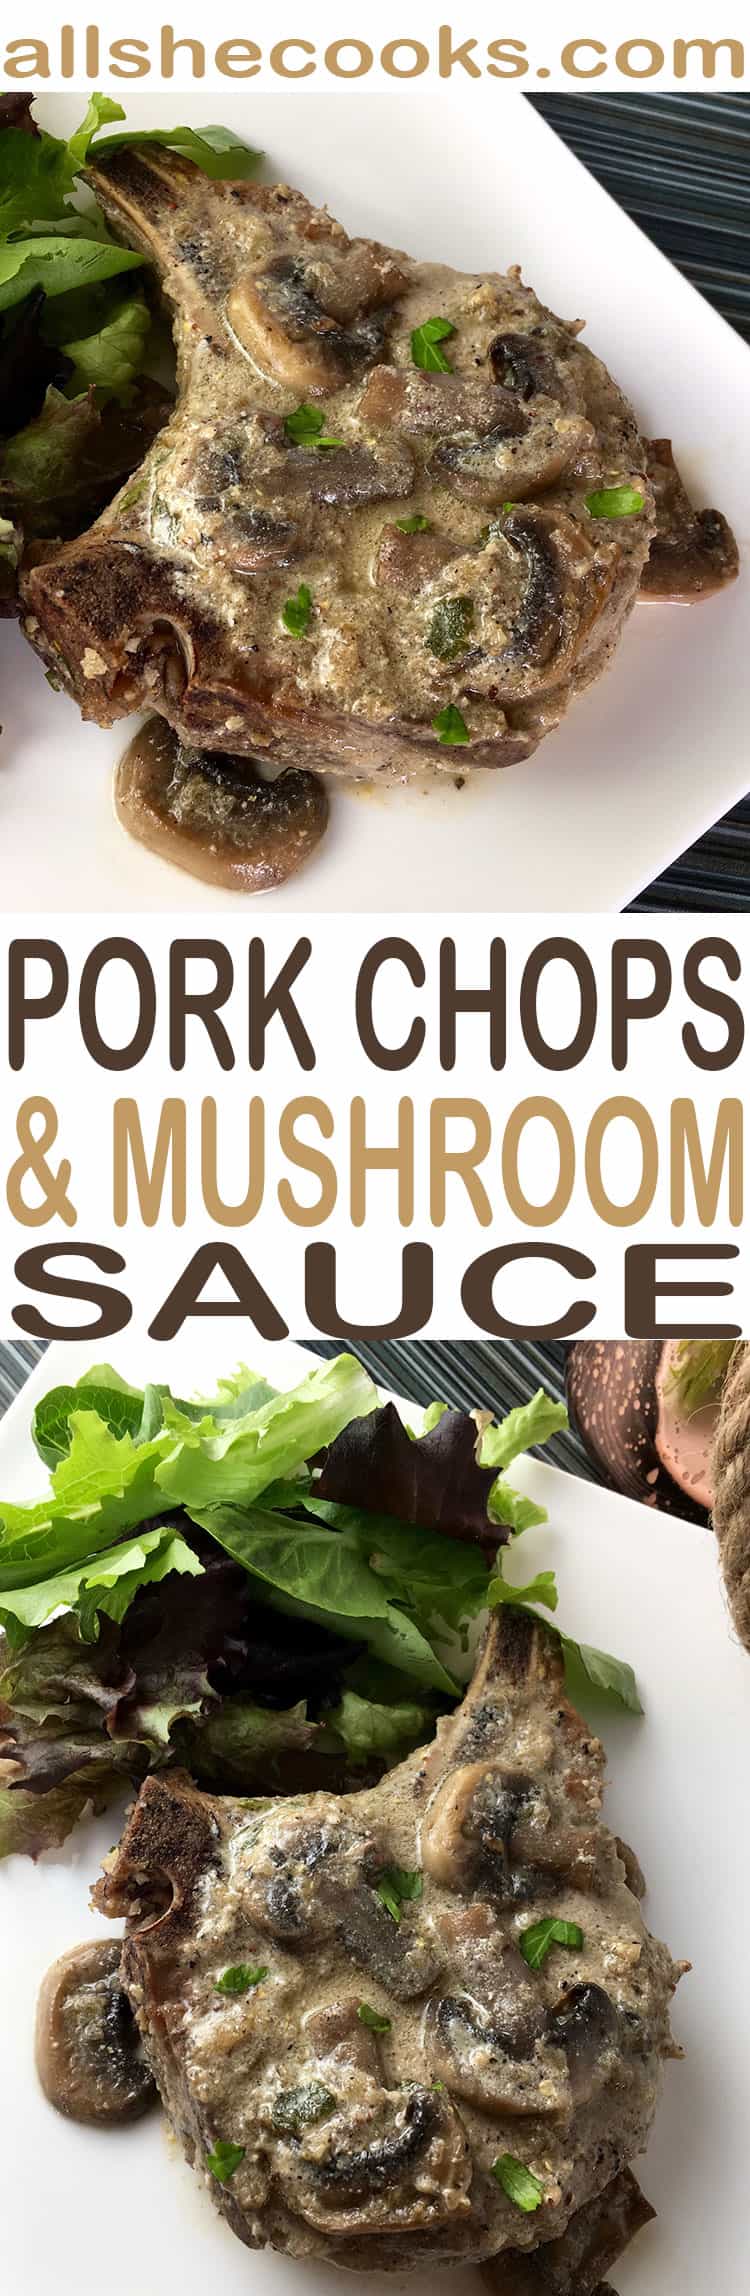 Enjoy this rich and delicious pork chops & mushroom sauce for dinner any night of the week. Easy meals are perfect for weeknights and this recipe delivers in no time at all.